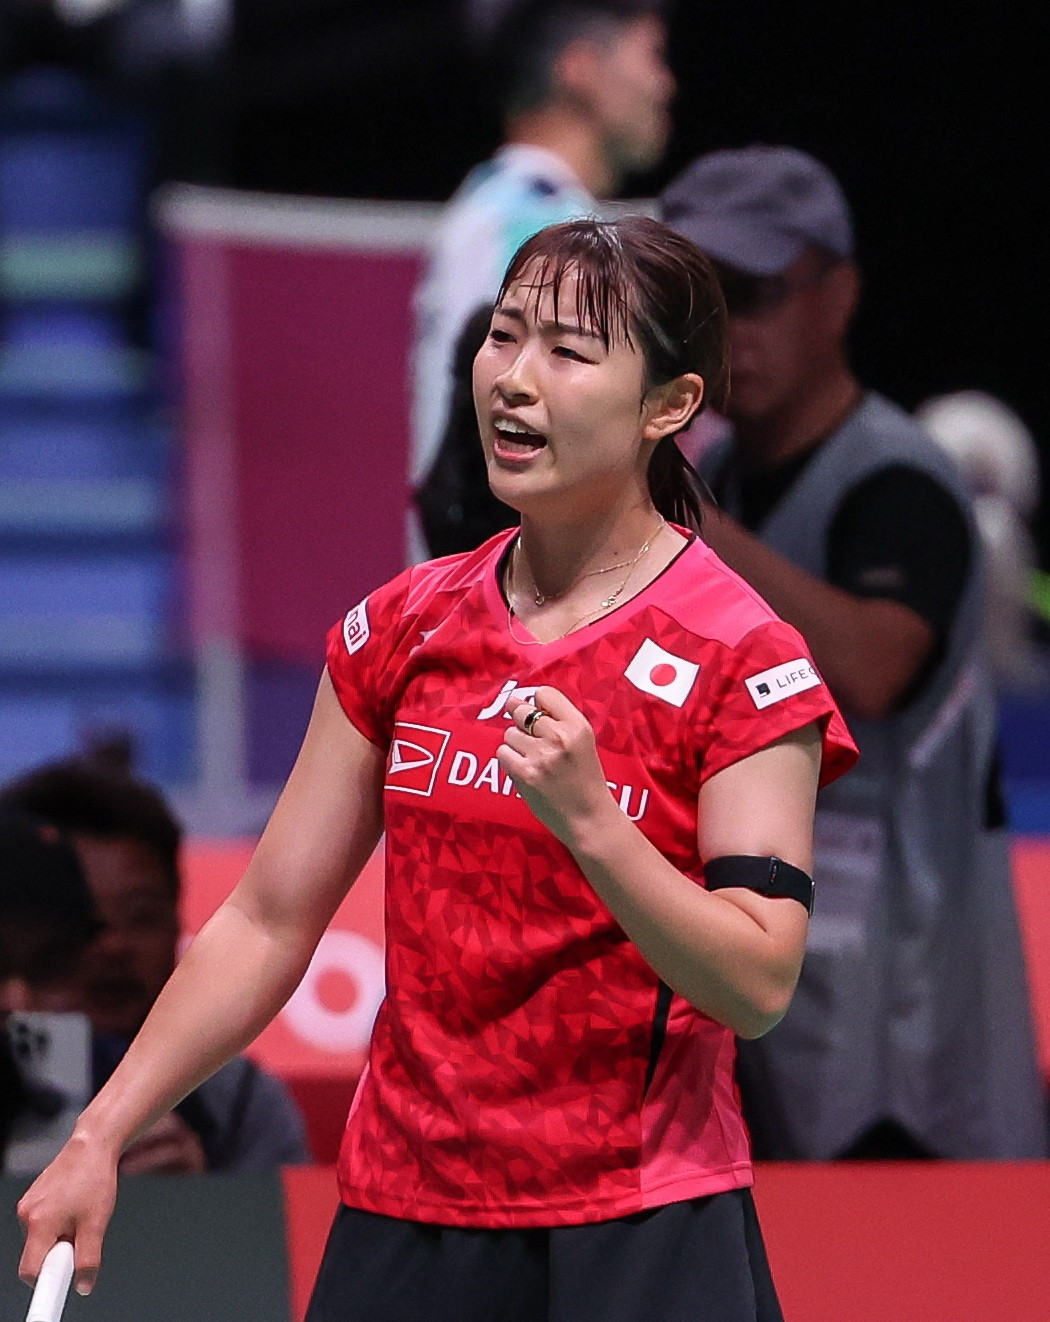 Japan’s Nozomi Okuhara has made it through to the third round at the Royal Arena in Copenhagen ©Badmintonphoto